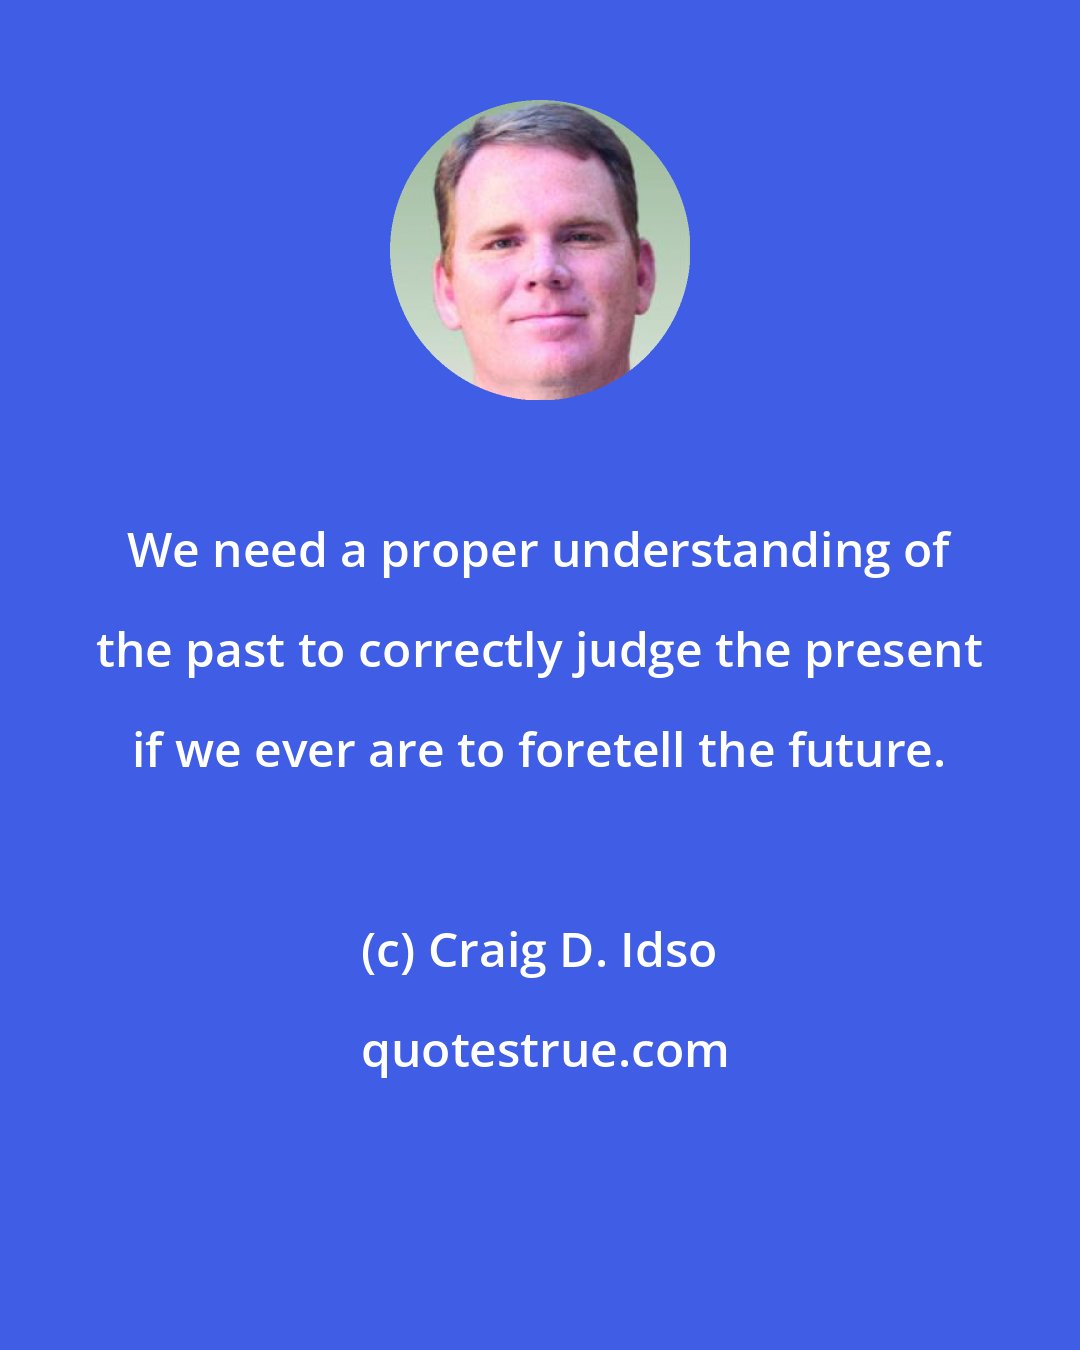 Craig D. Idso: We need a proper understanding of the past to correctly judge the present if we ever are to foretell the future.